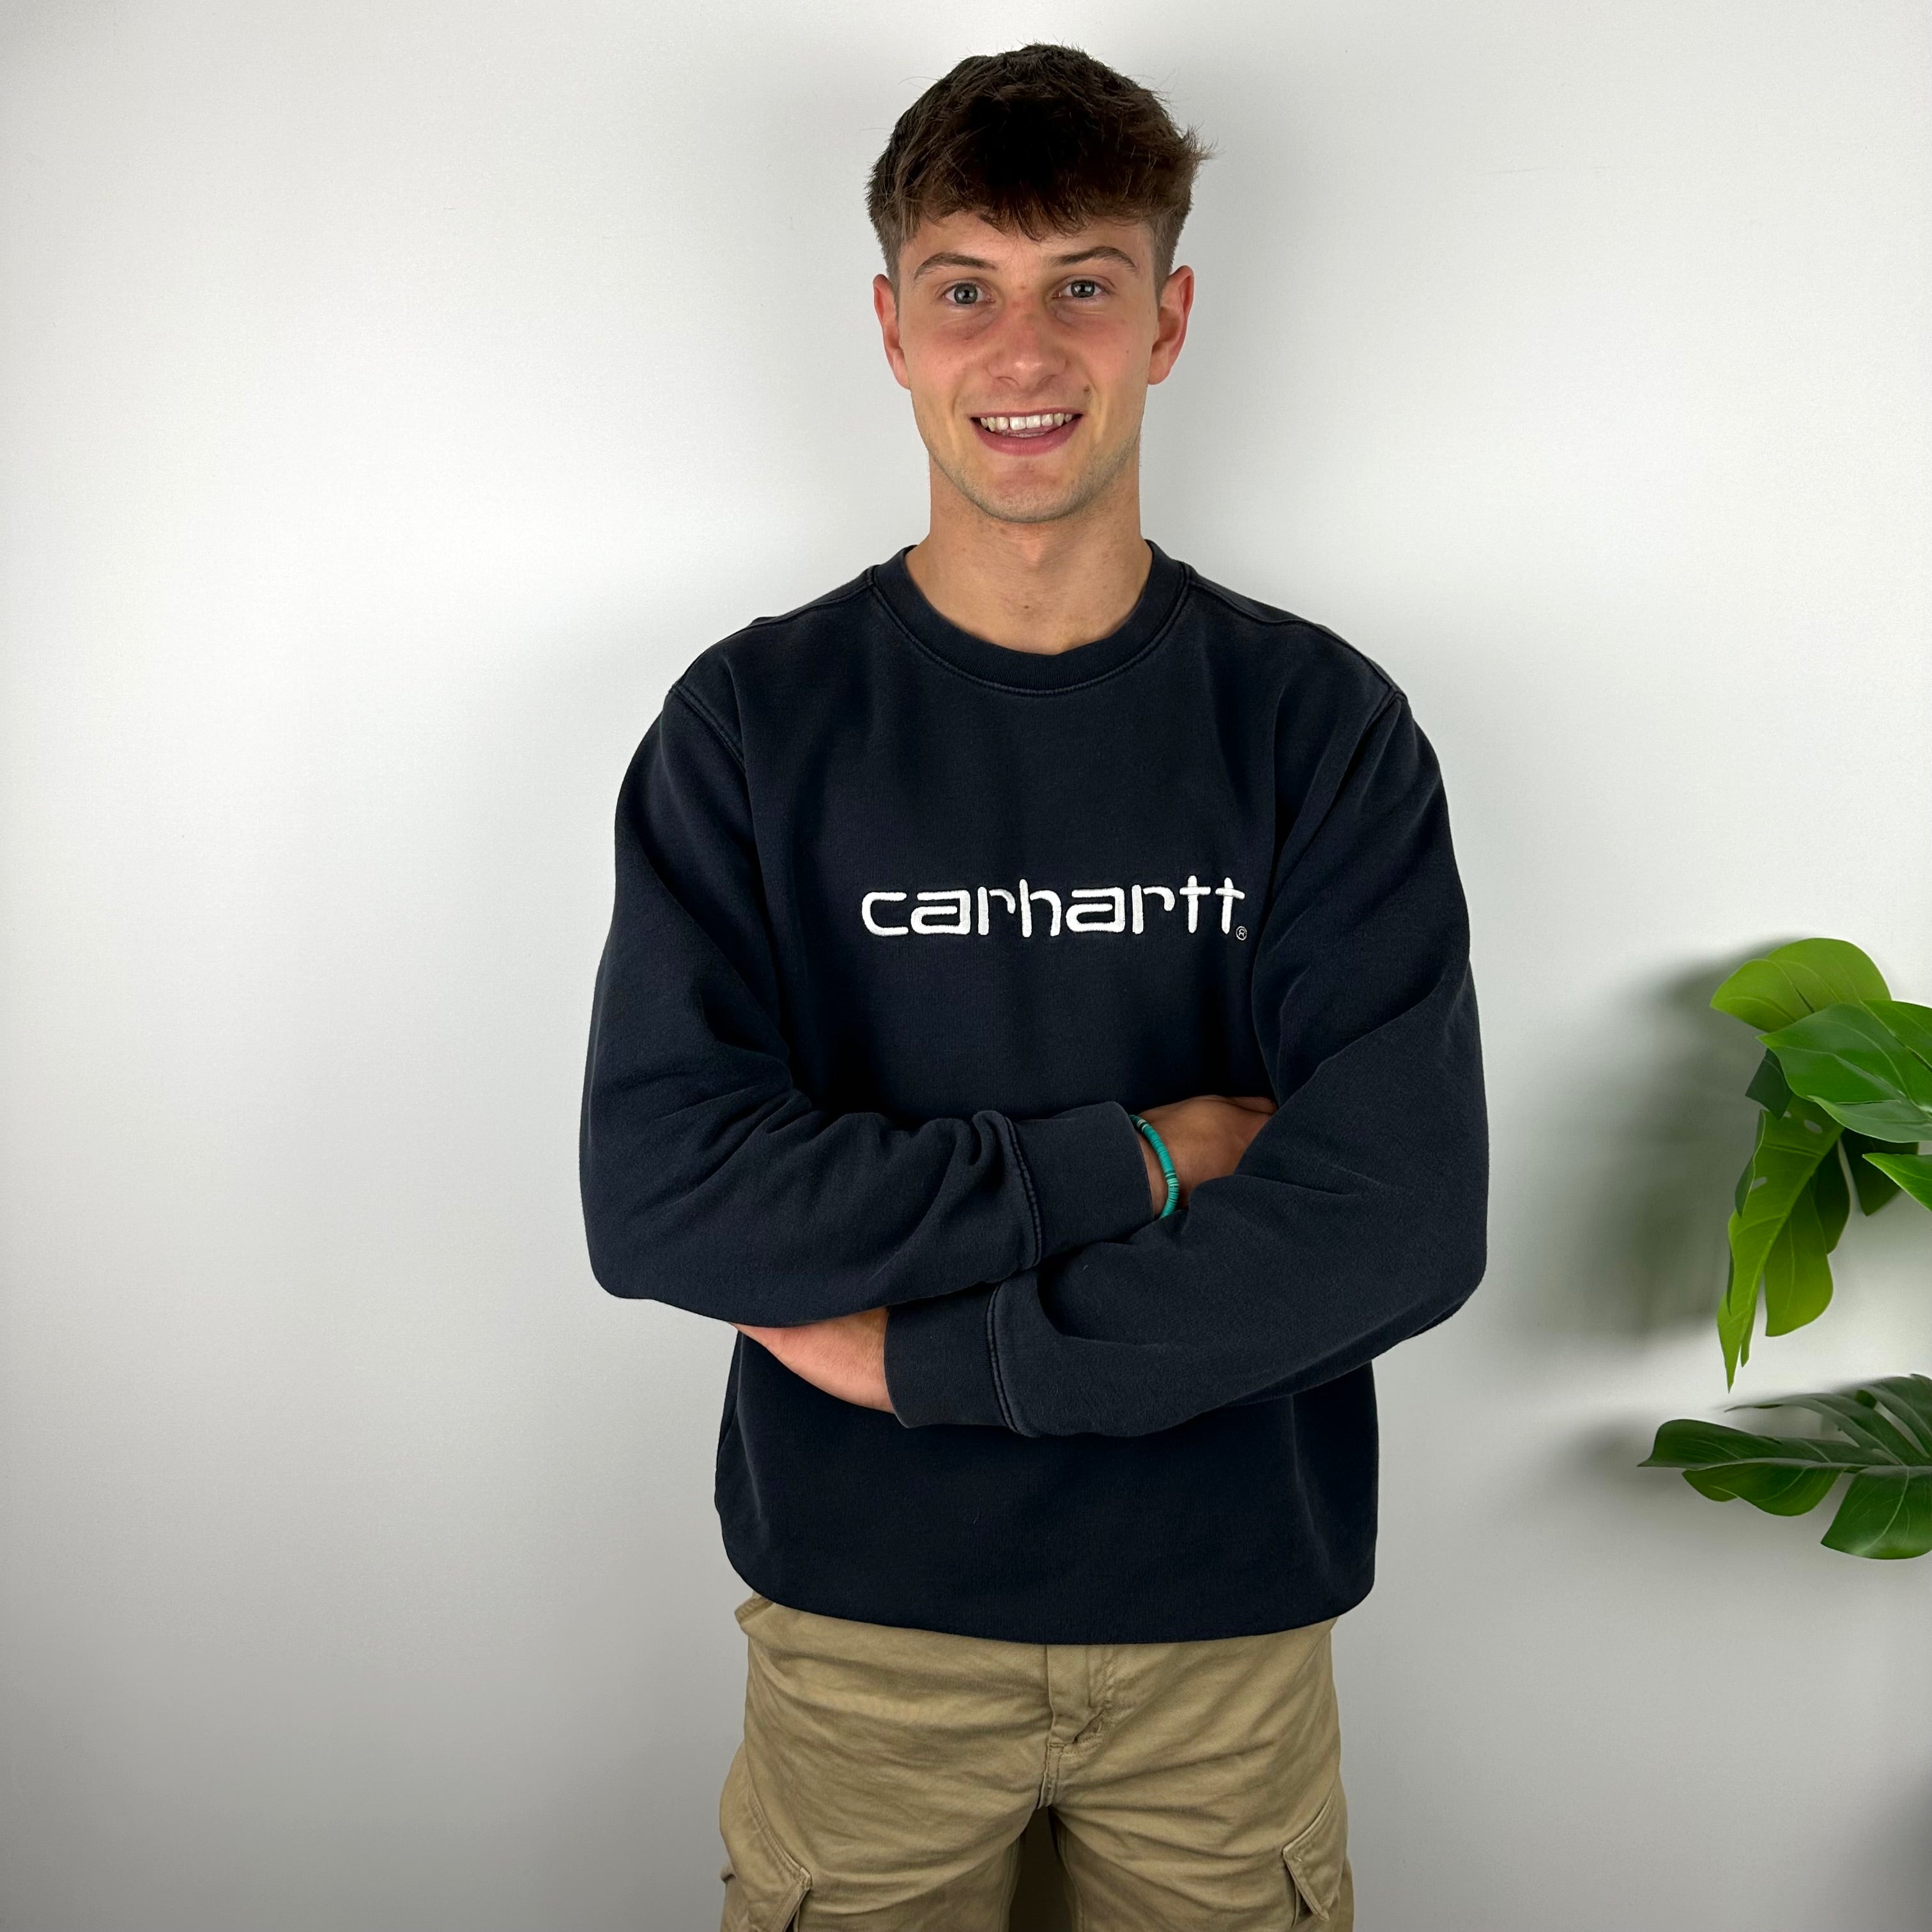 Carhartt Navy Embroidered Spell Out Sweatshirt (XL)